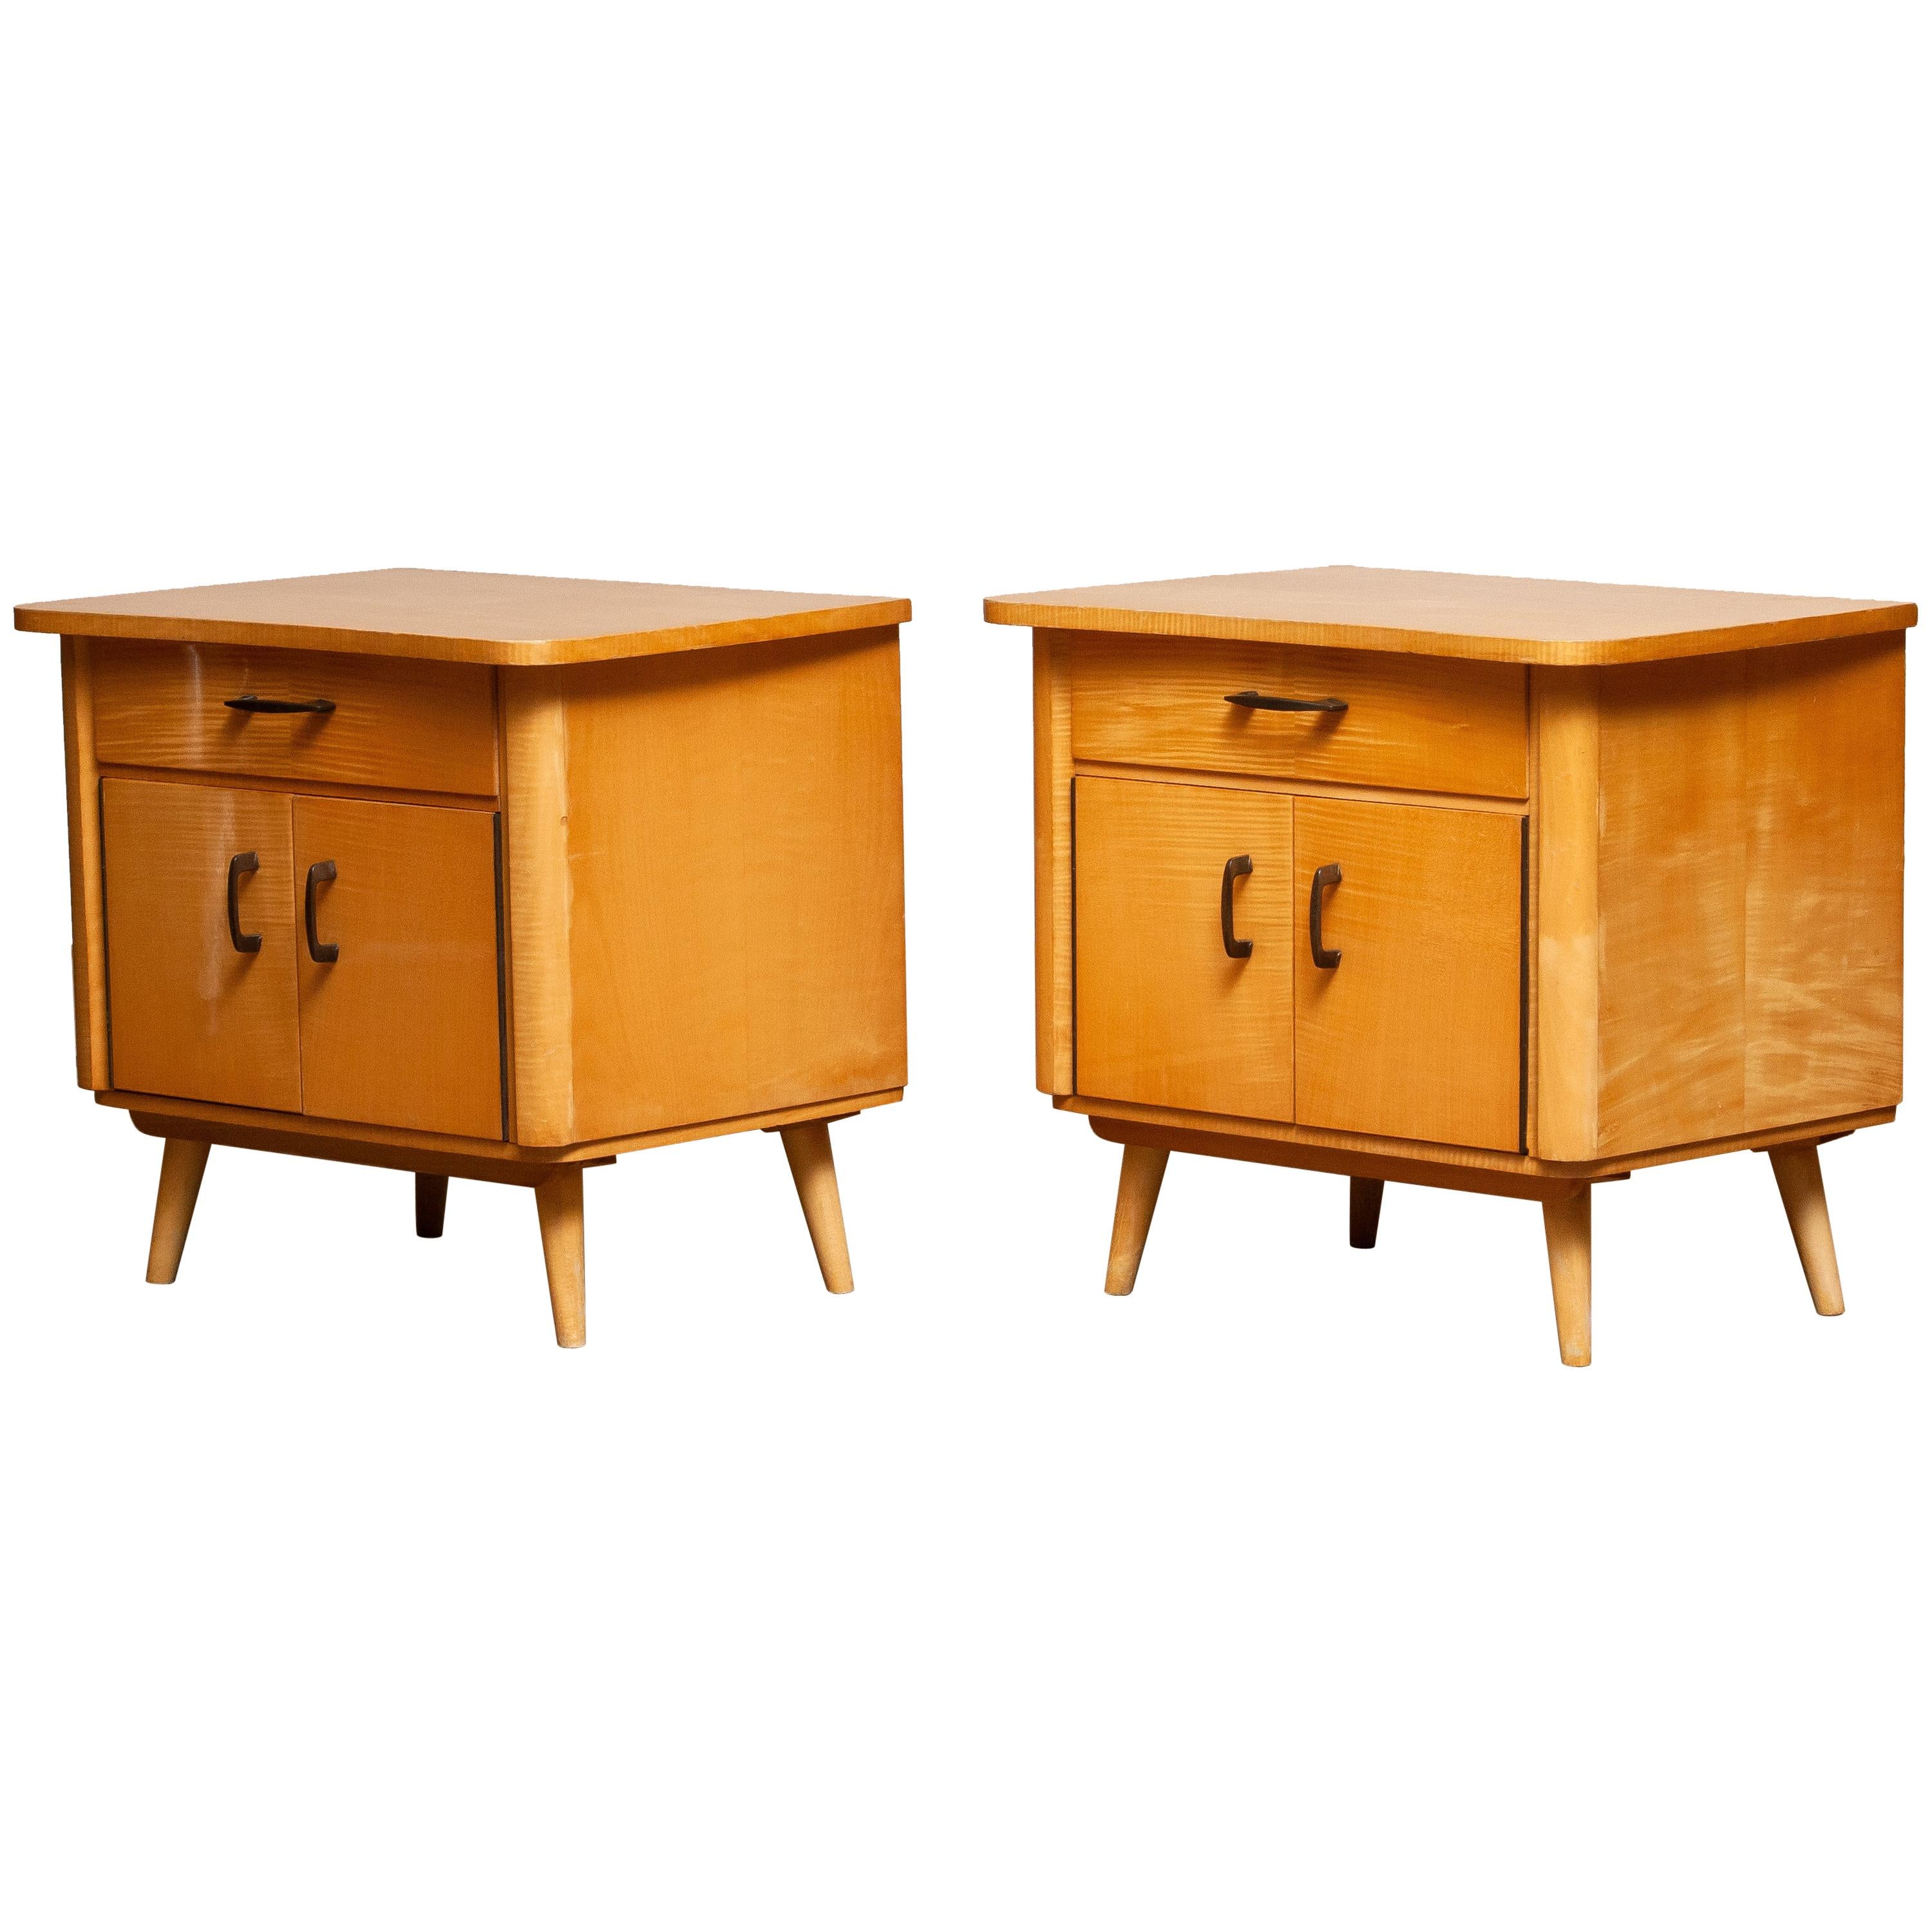 Beautiful set of two elm nightstands or bedside tables with drawers and doors made in Sweden. Both in good condition.